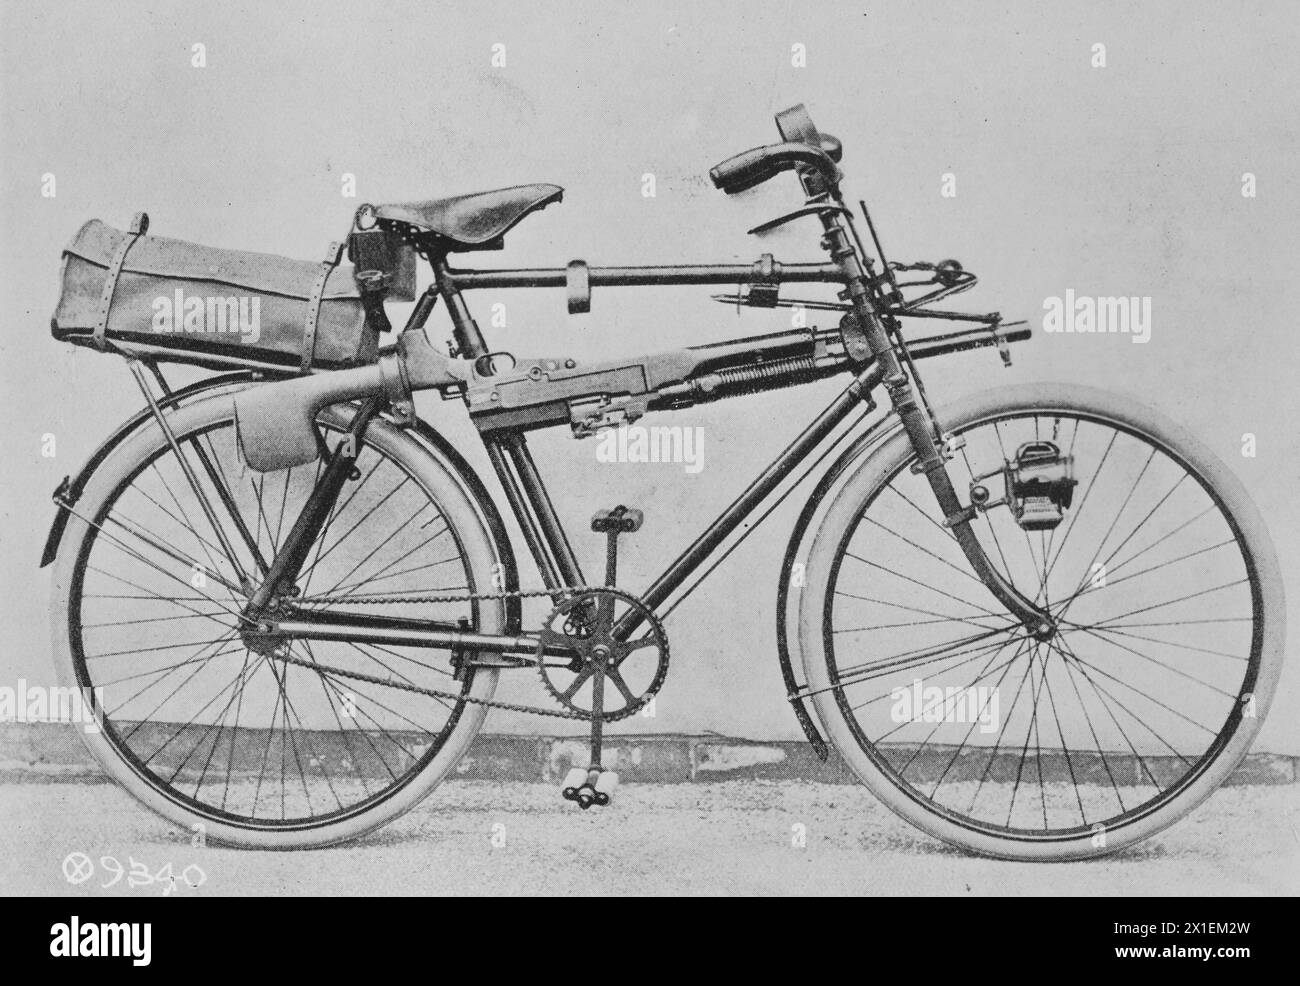 Bicycle with a .303 inch Hotchkiss gun carried through its frame ca. 1918 Stock Photo